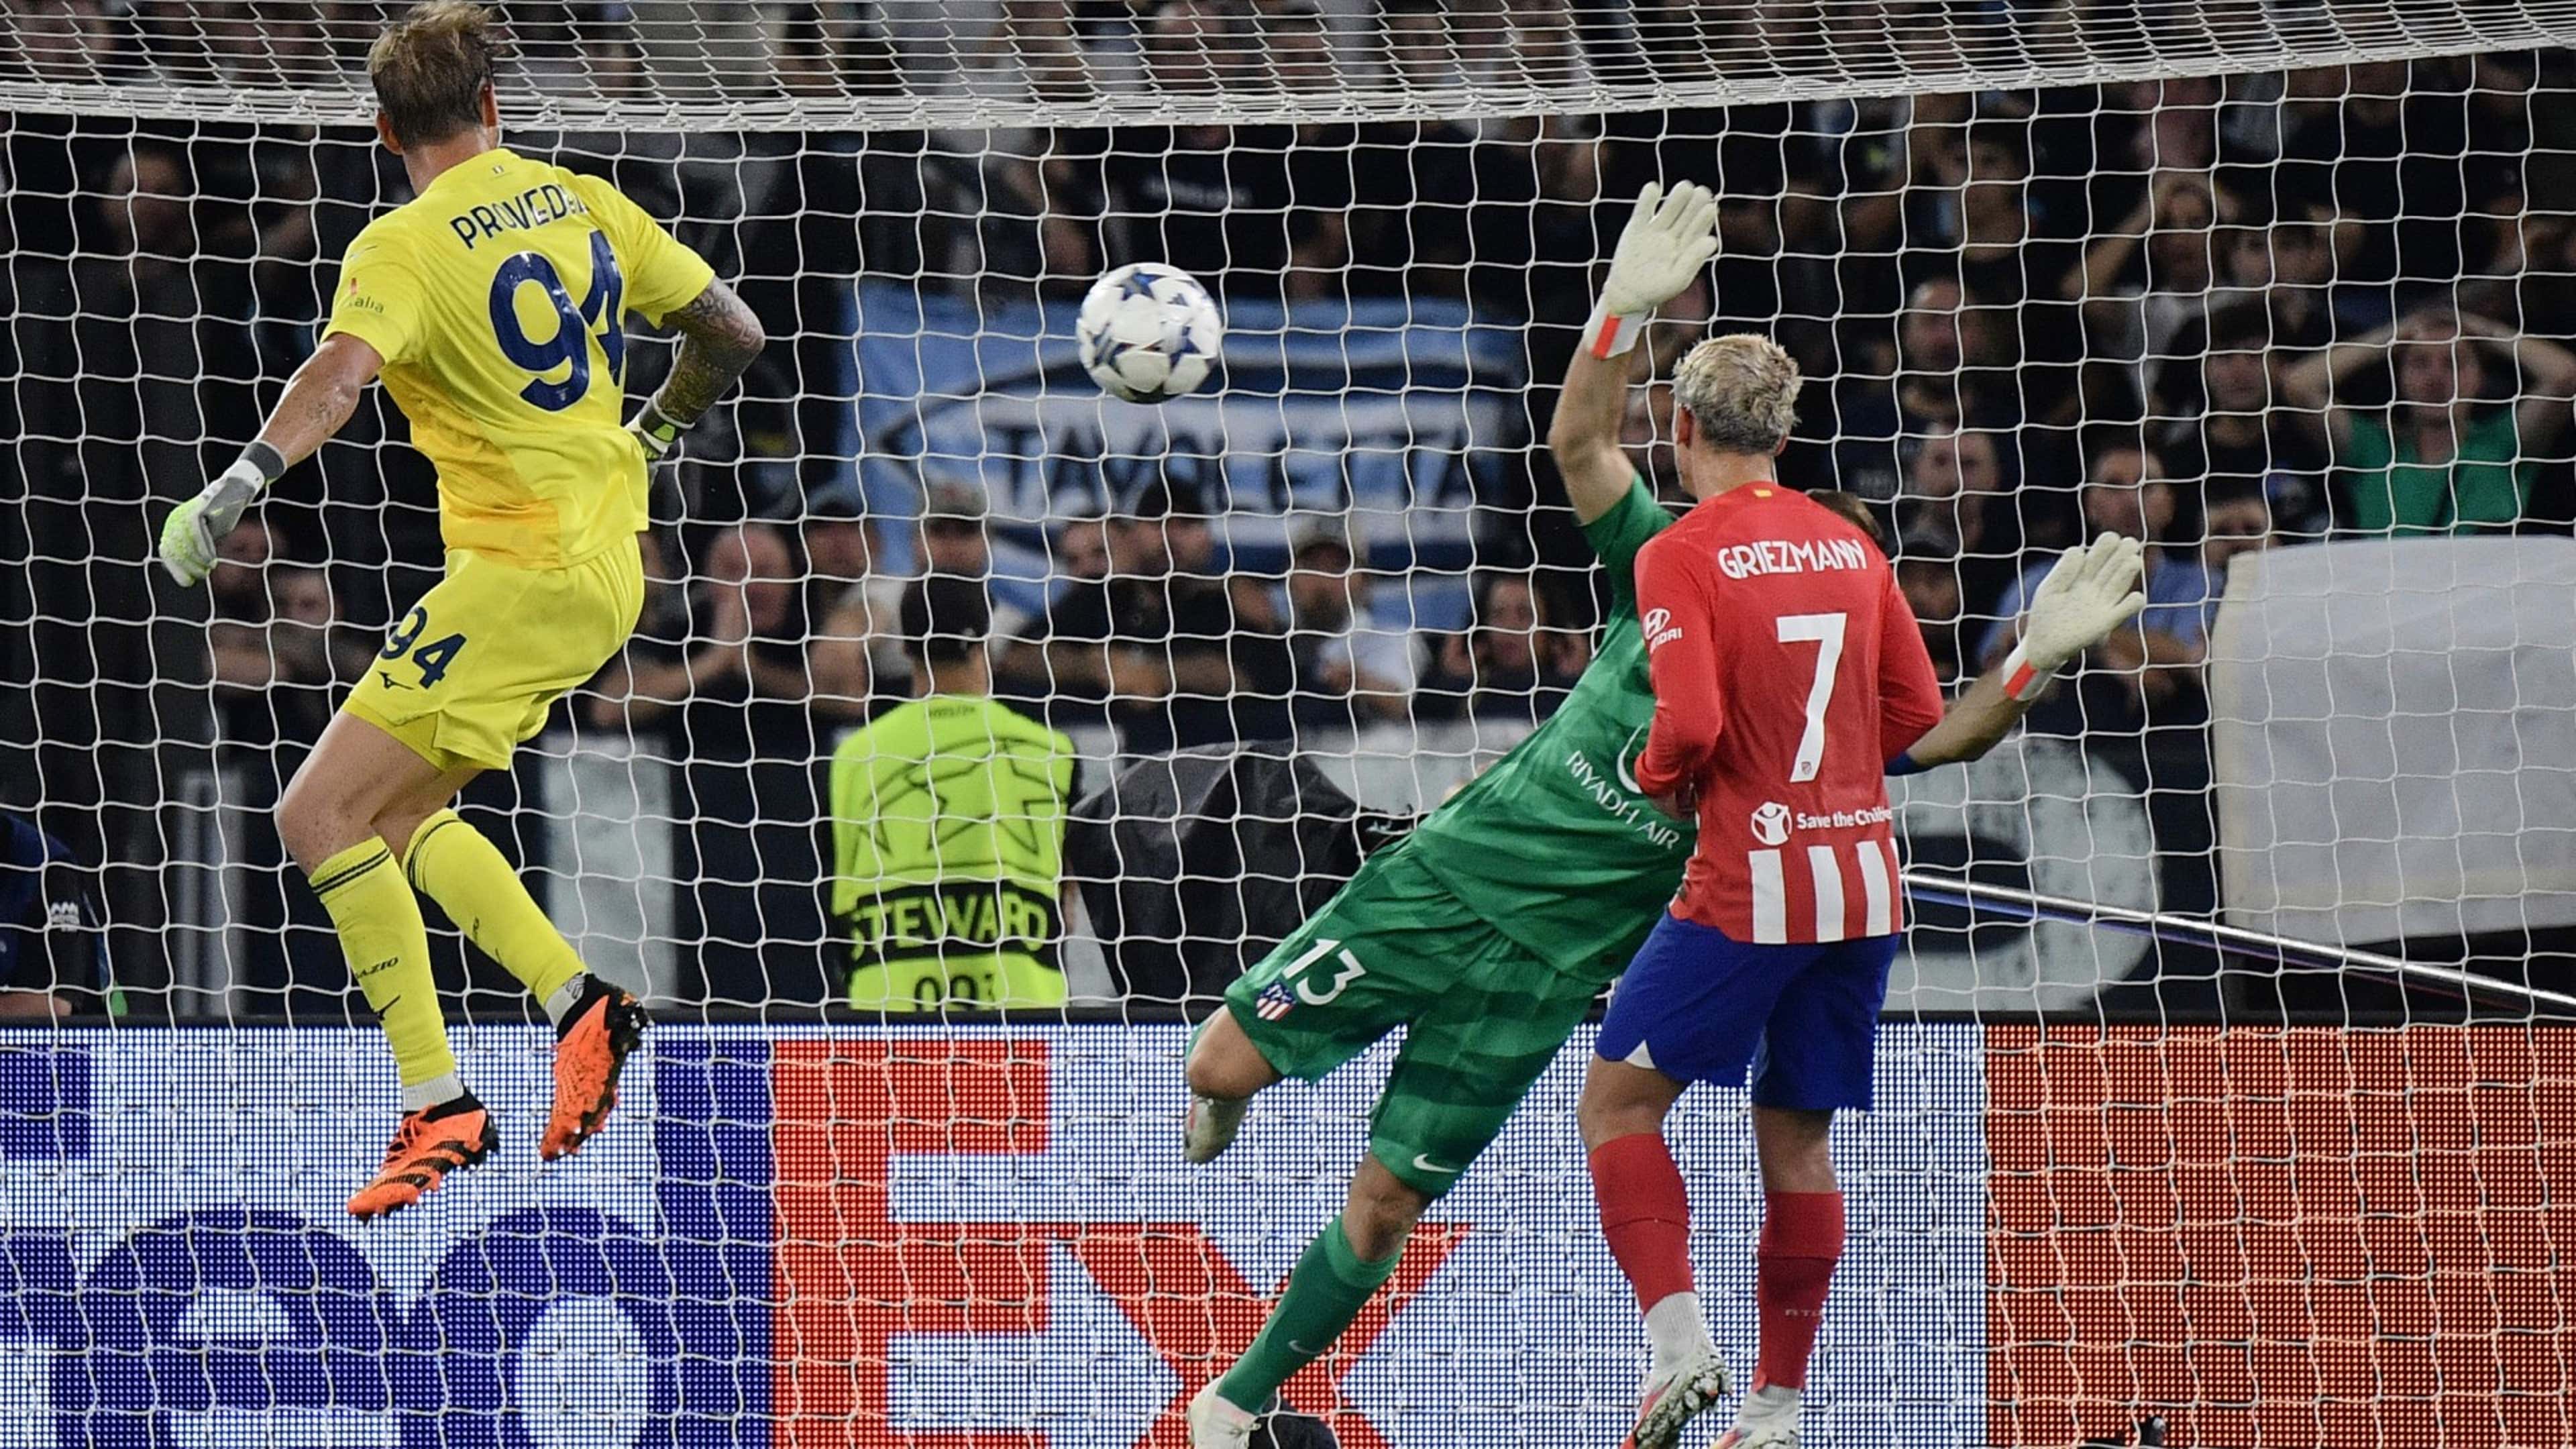 Keeper Provedel heads in last-ditch equaliser for Lazio against Atletico  Madrid